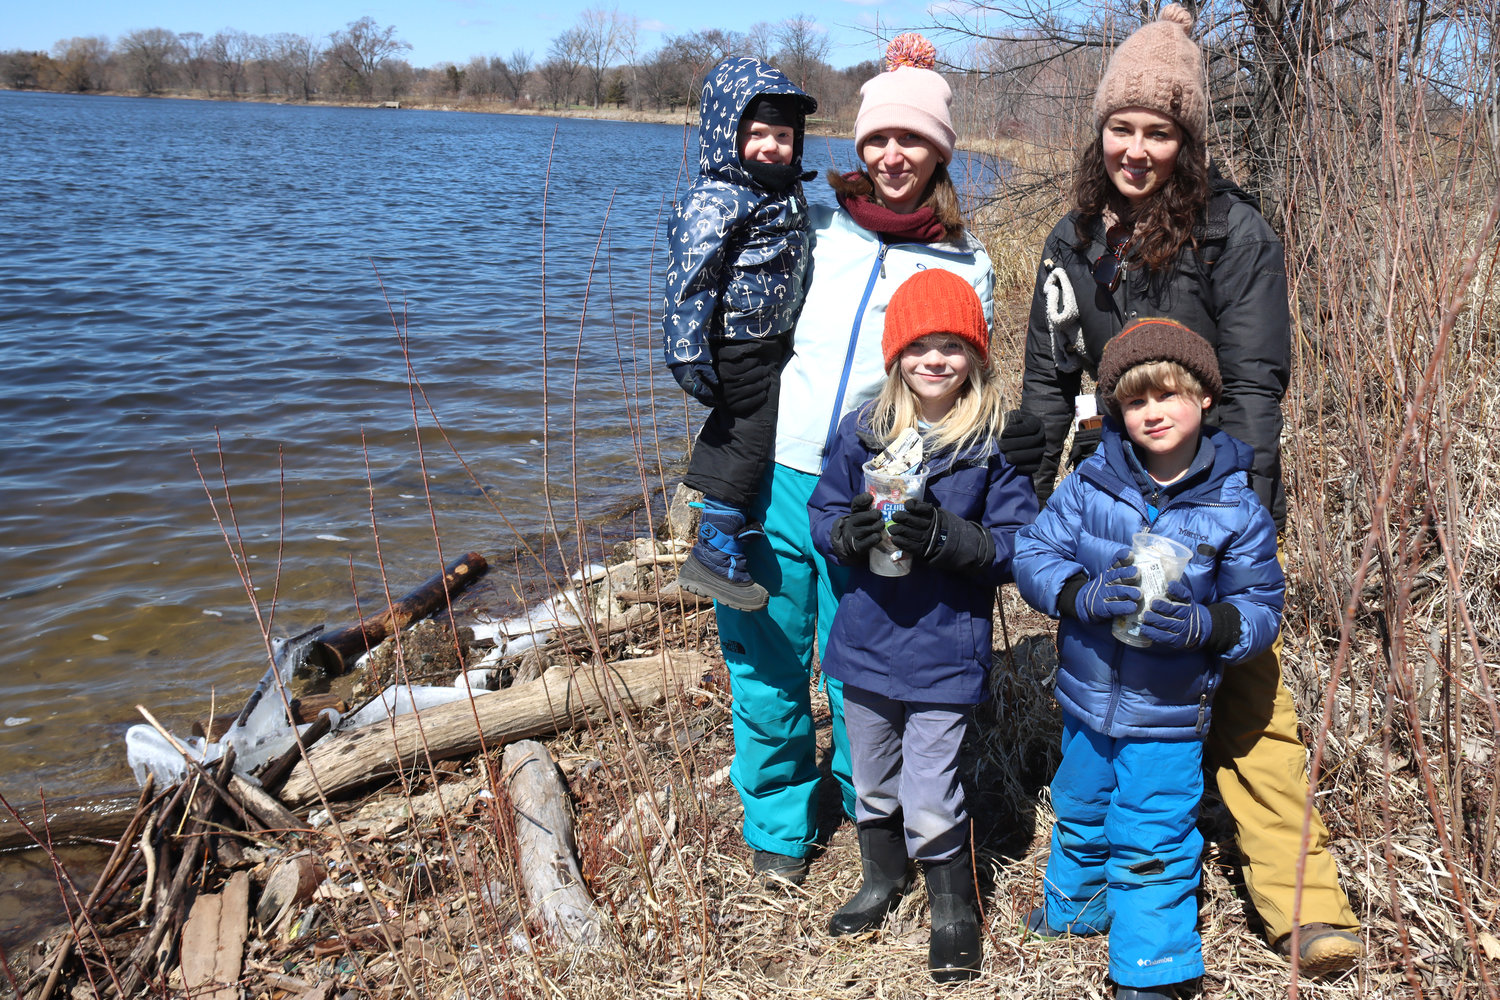 Nicole Cavender (left), who is Dakota, with Weston, 6, and Becket, 2.5 years, along with Ali Mailander (right) and Hap clean up trash along Lake Hiawatha on April 16, 2022. (Photo by Tesha M. Christensen)